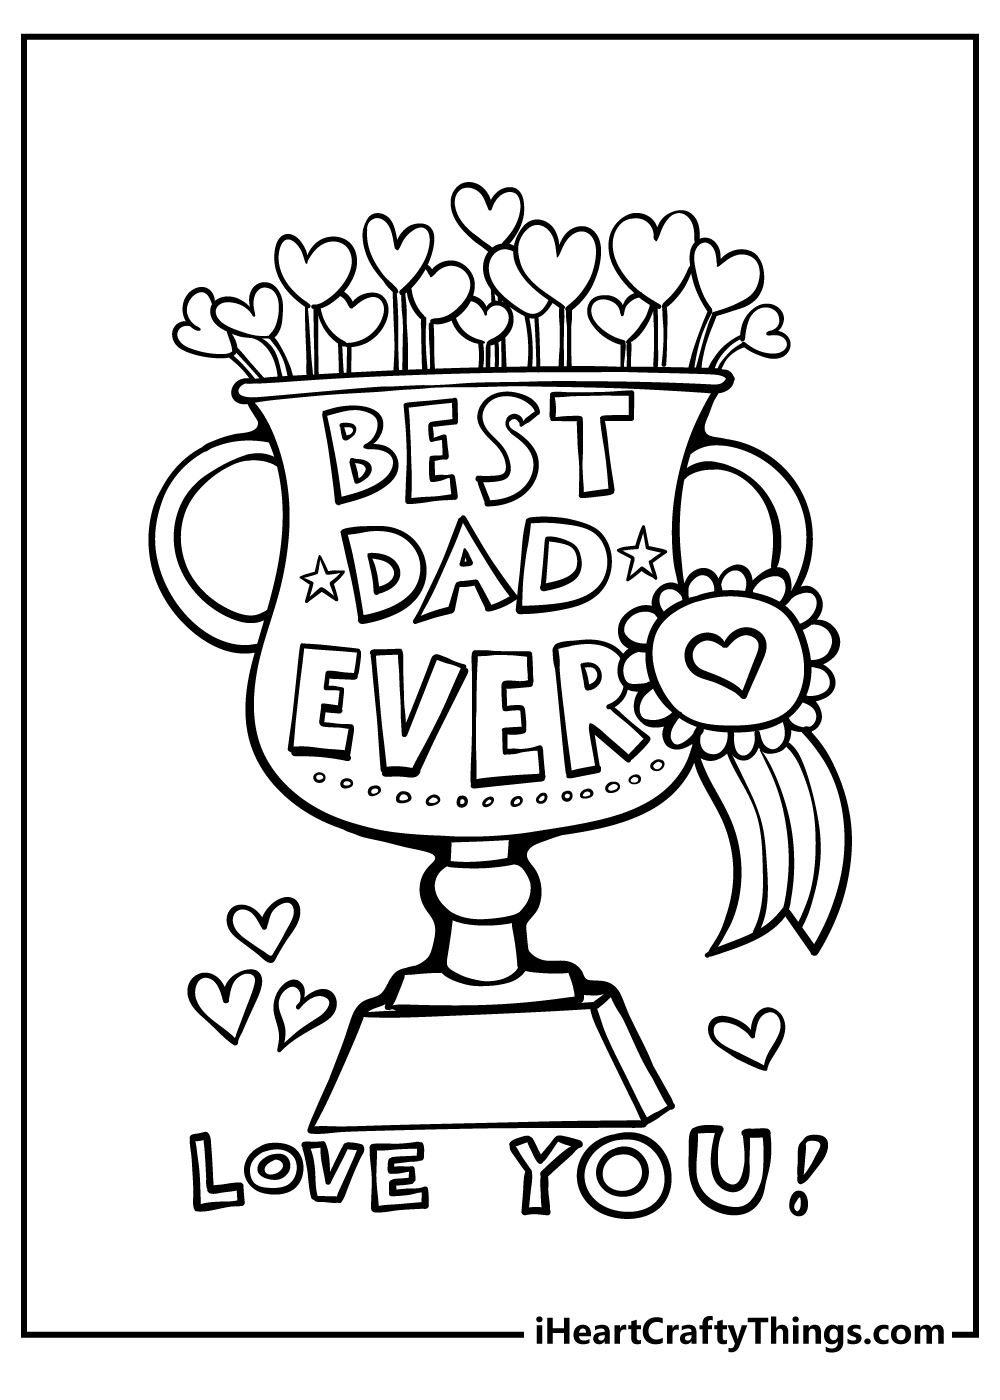 Fathers Day Print Out Cheap Online Save 66 Jlcatj gob mx